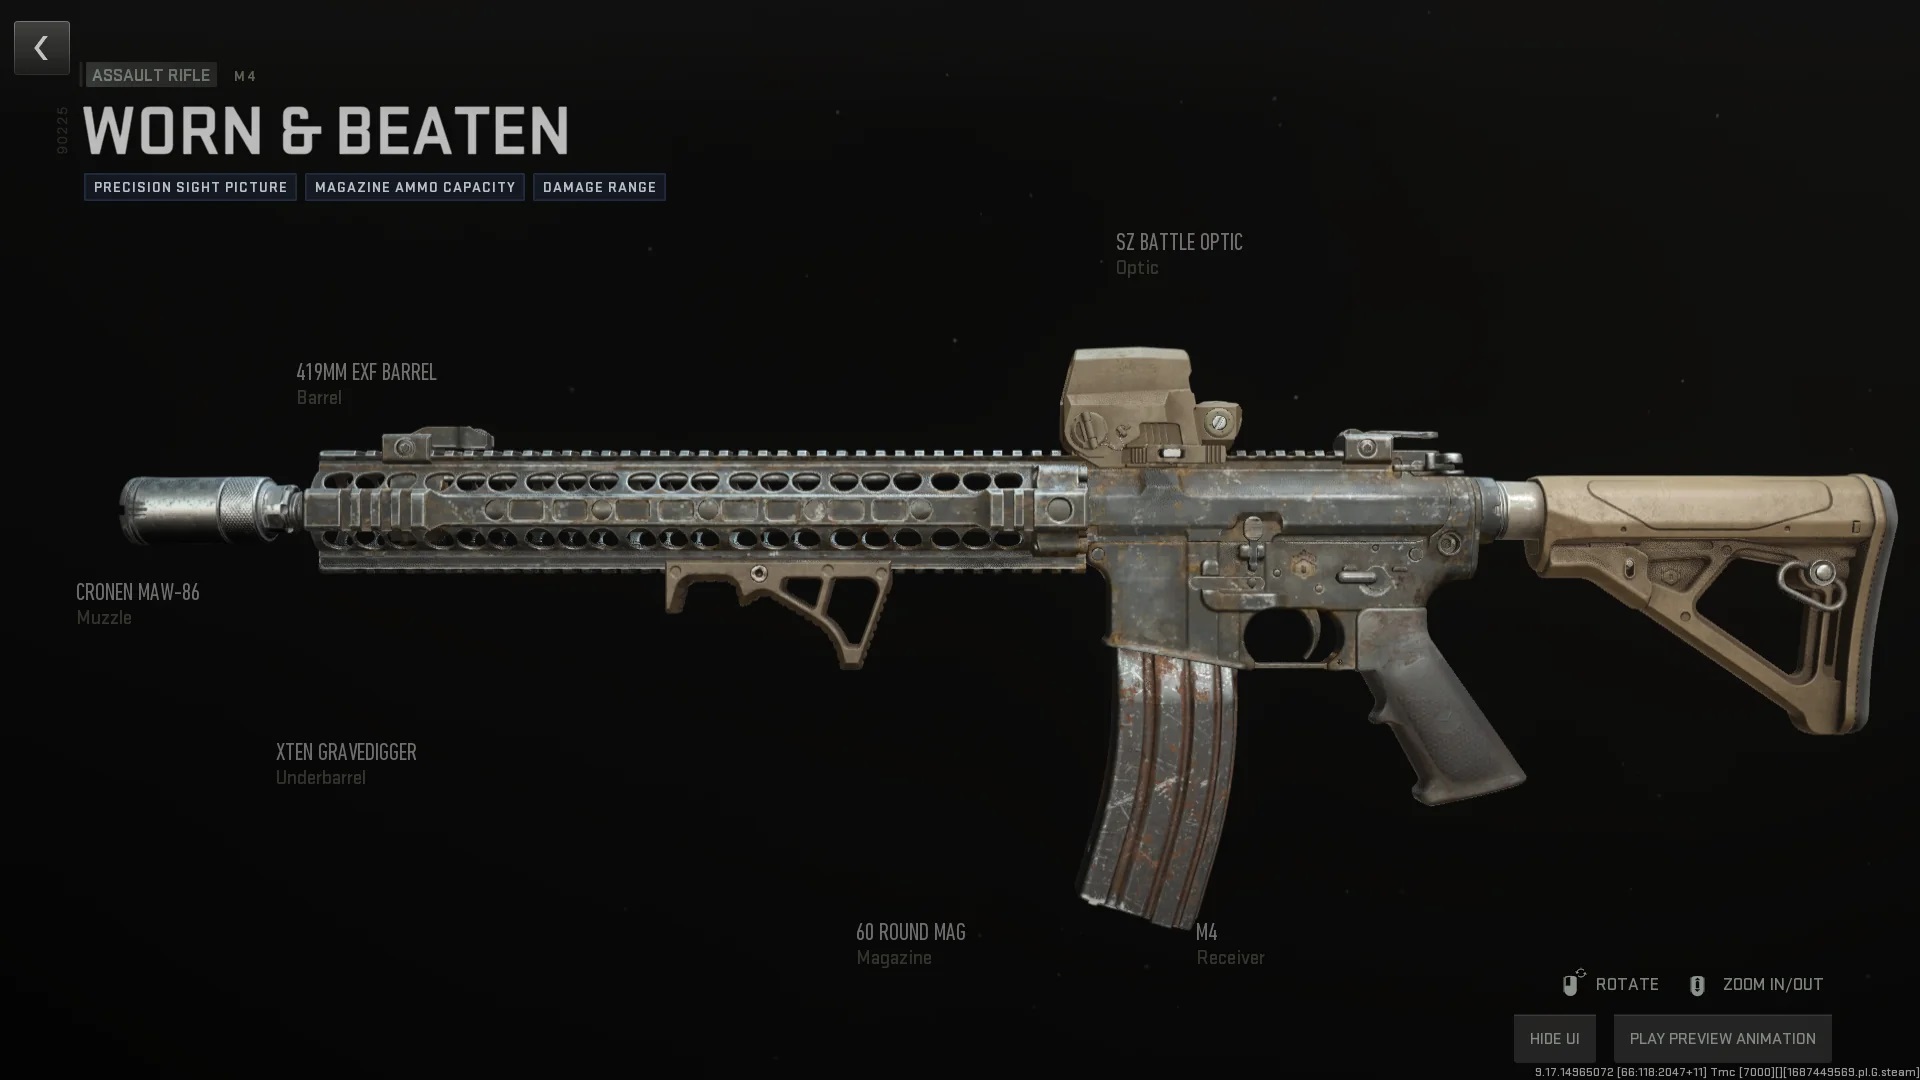 Weapon animations in Call of Duty: Modern Warfare were done by hand